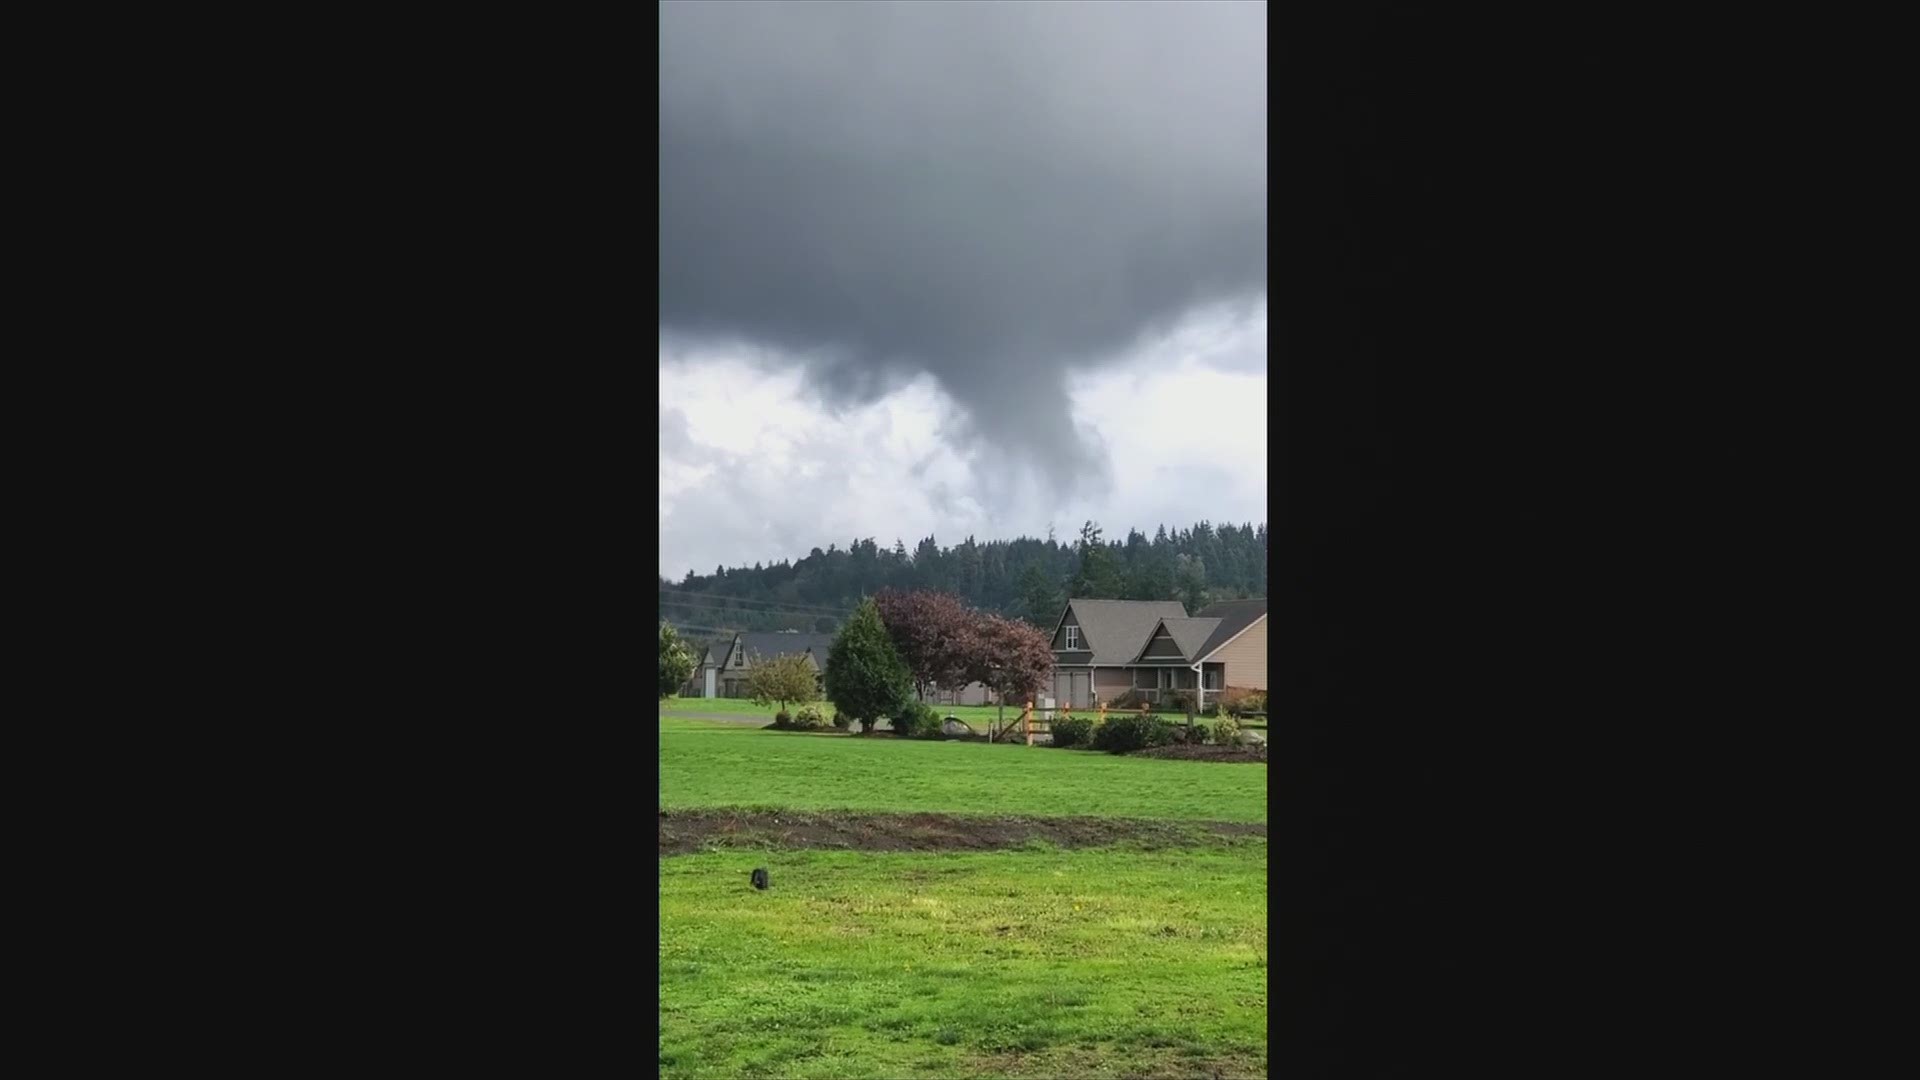 A week tornado touched down Friday afternoon in Thurston County.